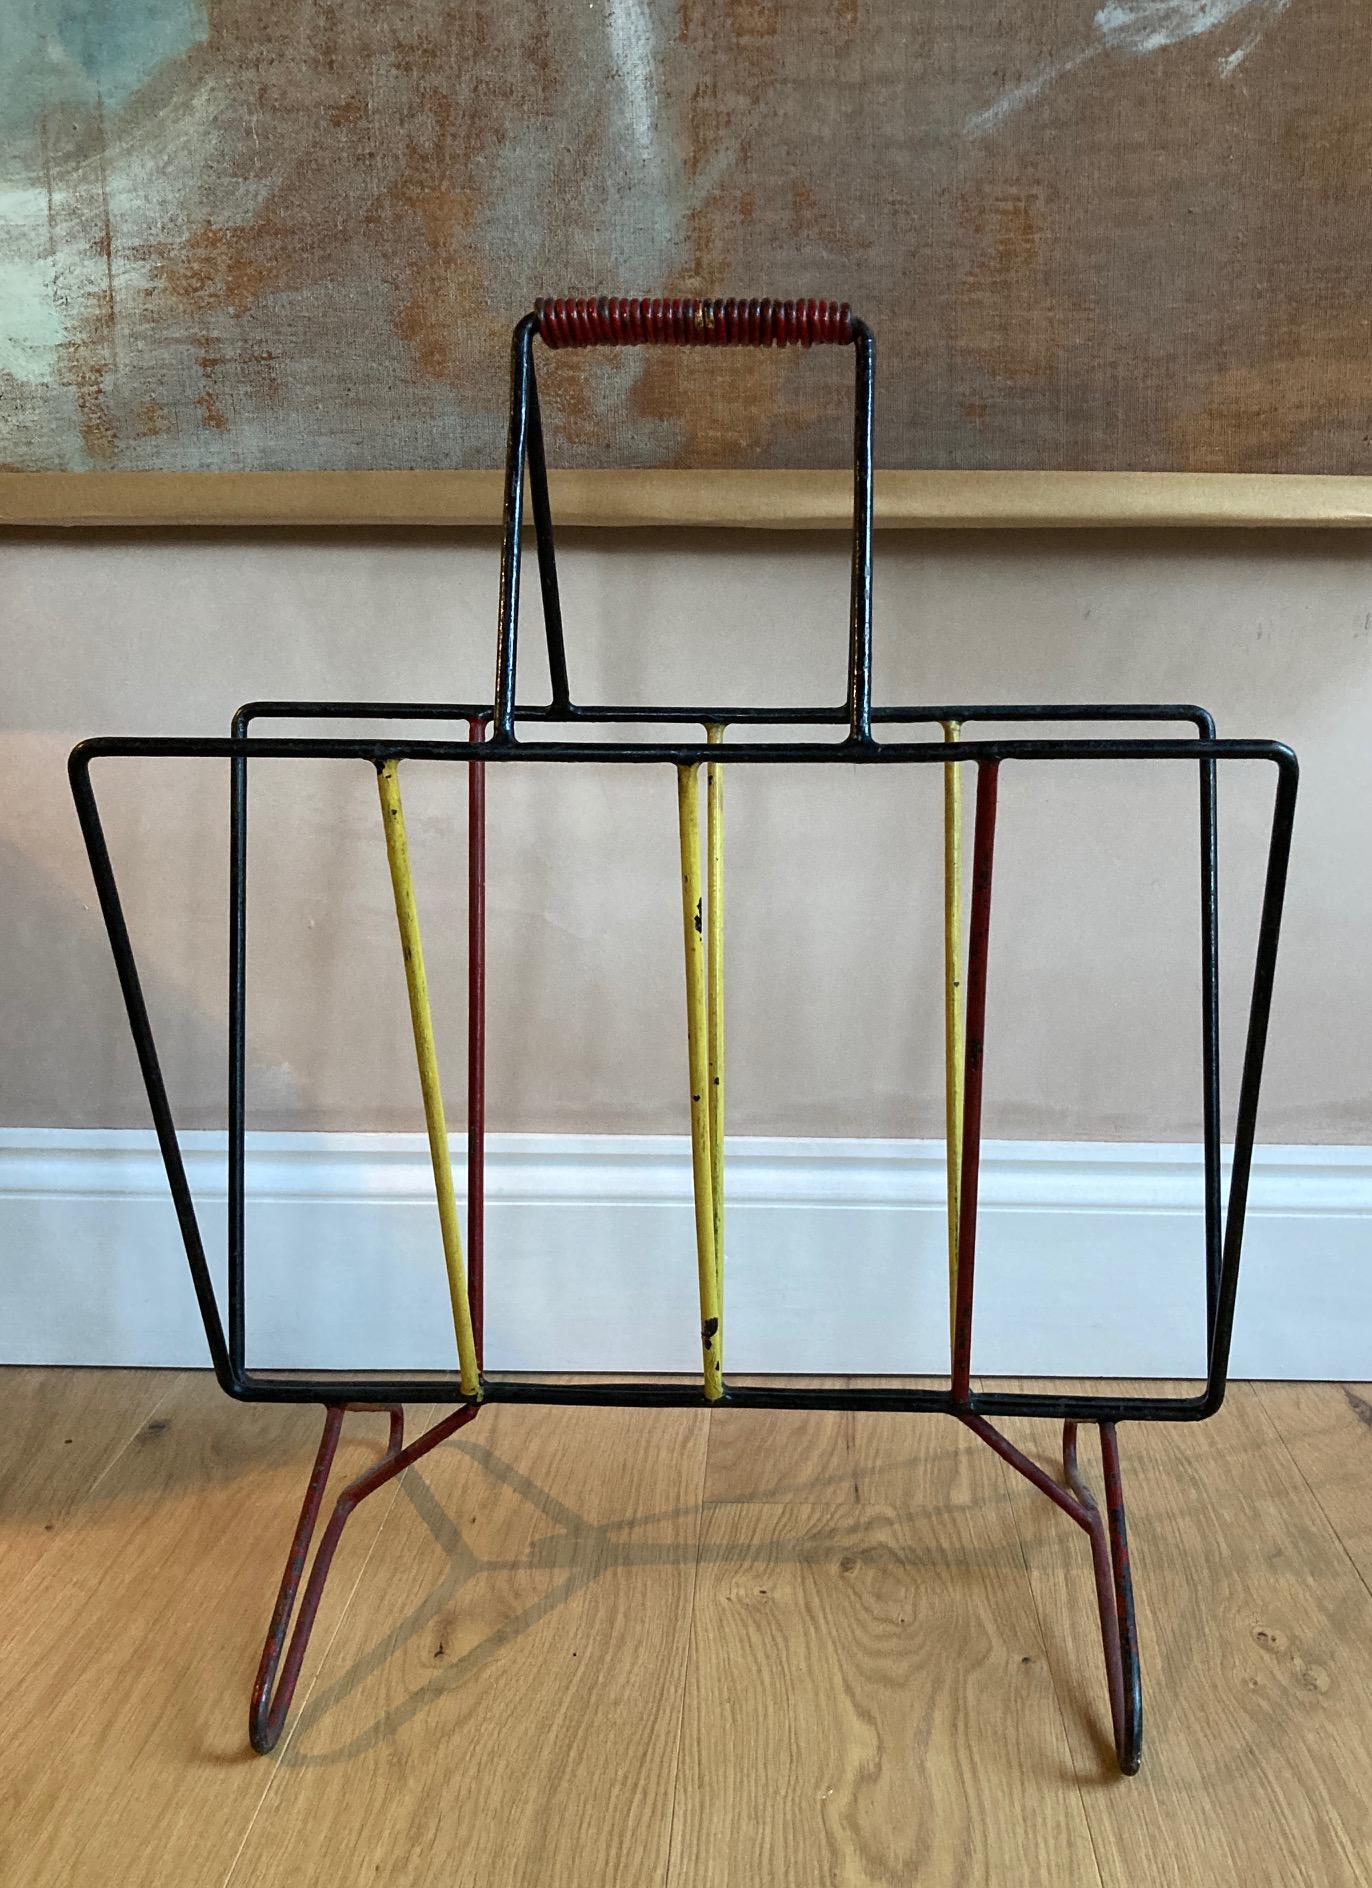 A fabulous large French midcentury painted iron magazine rack in the style of Mathieu Mategot. A period midcentury piece, larger than average magazine racks so able to hold a few magazines, retaining original red, black and yellow paint.